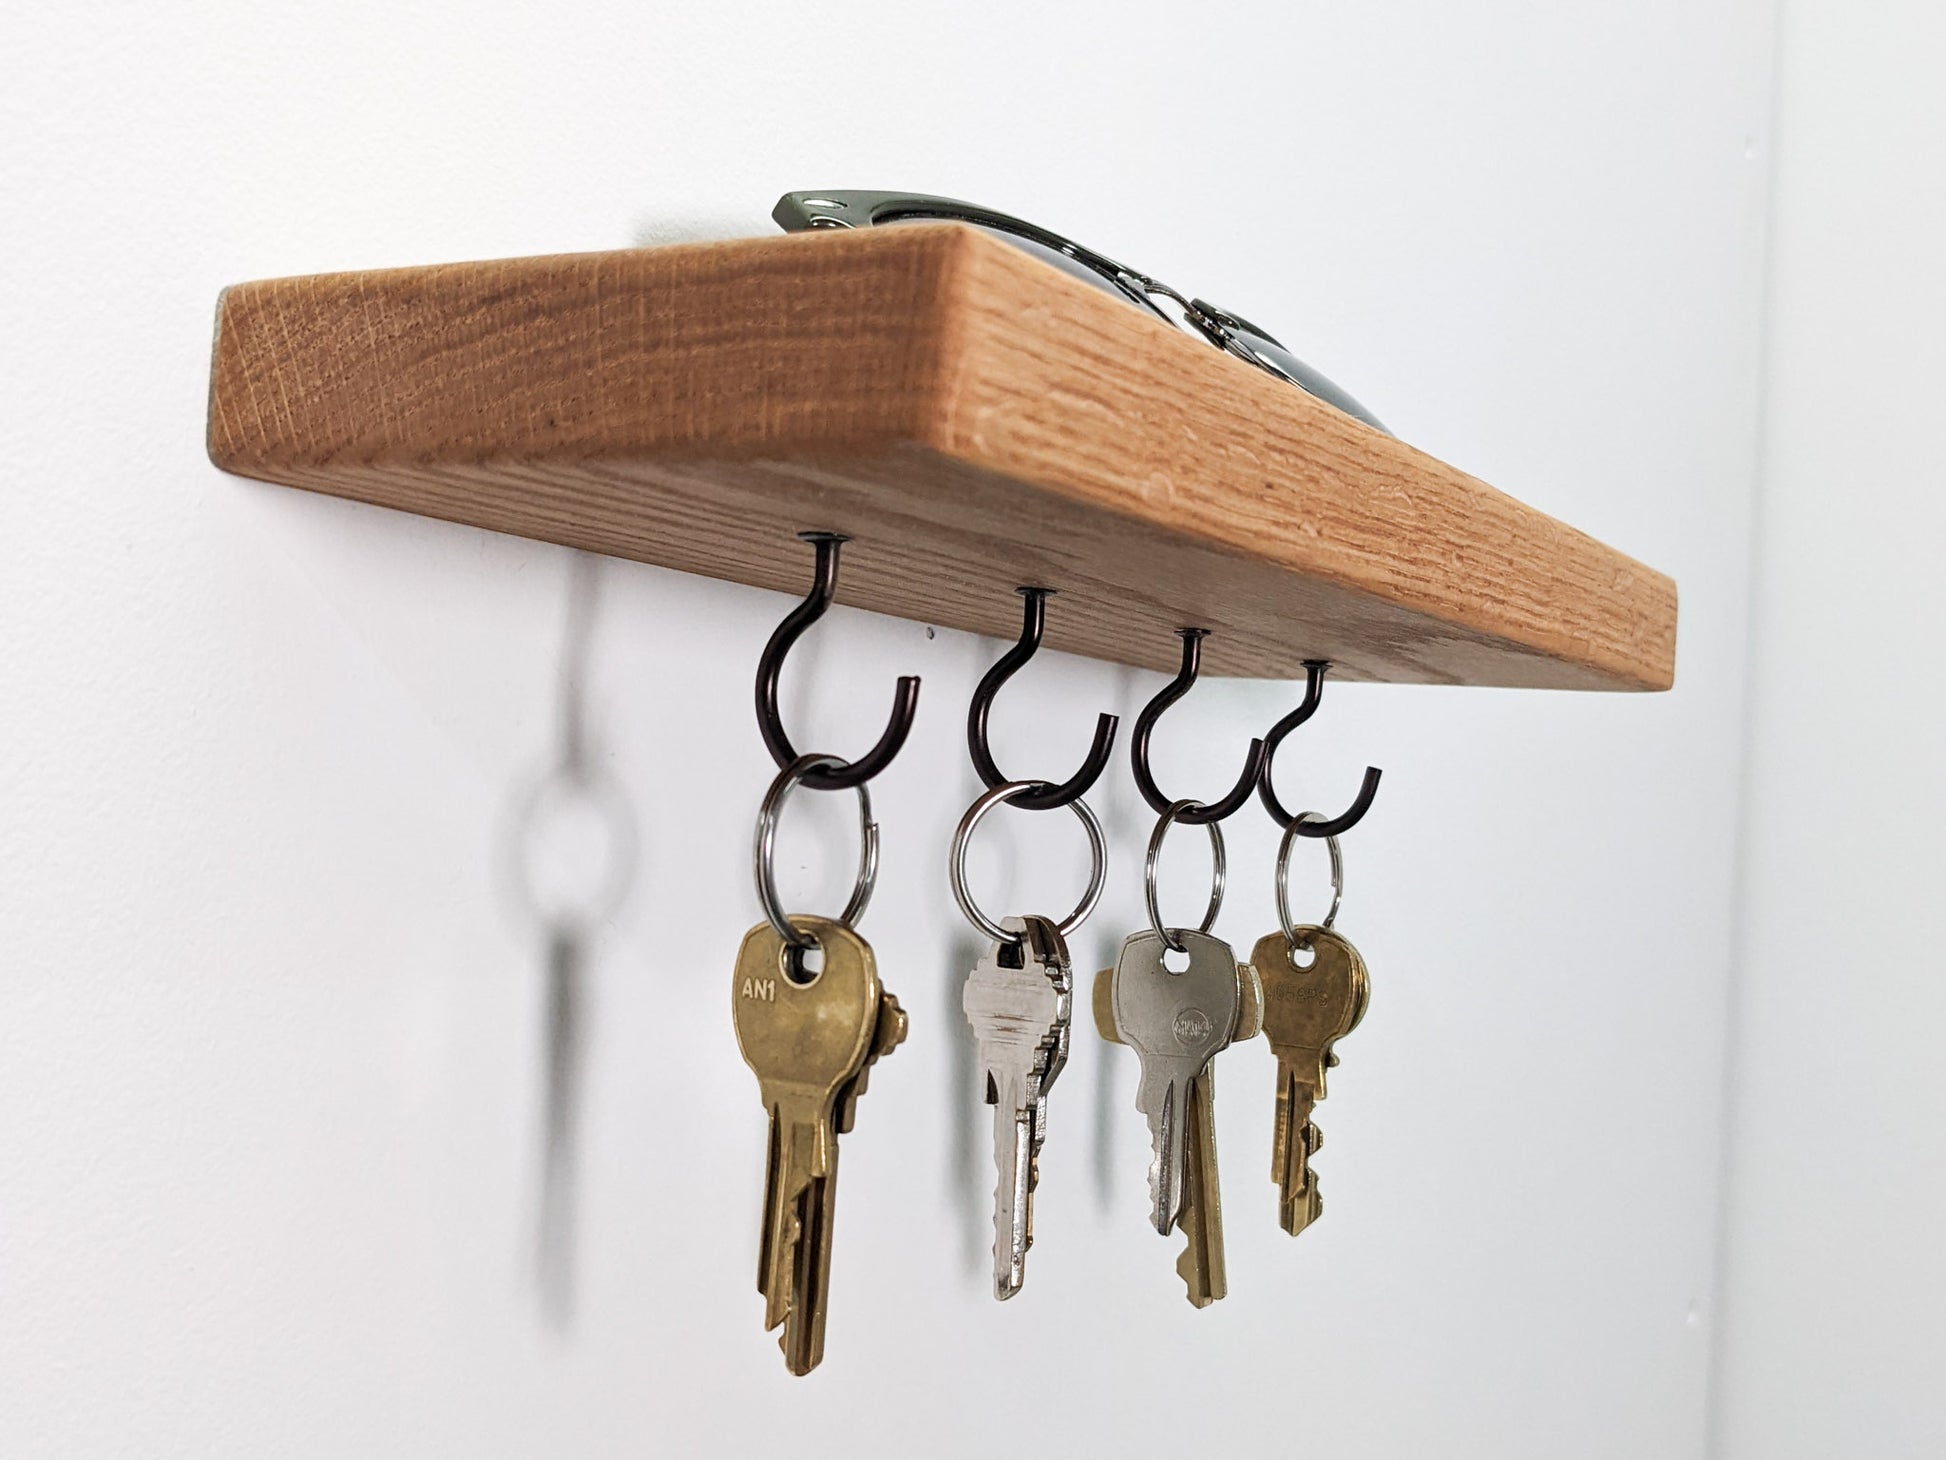 Four black key hooks hang securely from a wall-mounted floating oak shelf. Four keys are bronze, four are silver. The keys cast a slight shadow onto the white wall behind them. On top of the shelf sits a pair of sunglasses. 